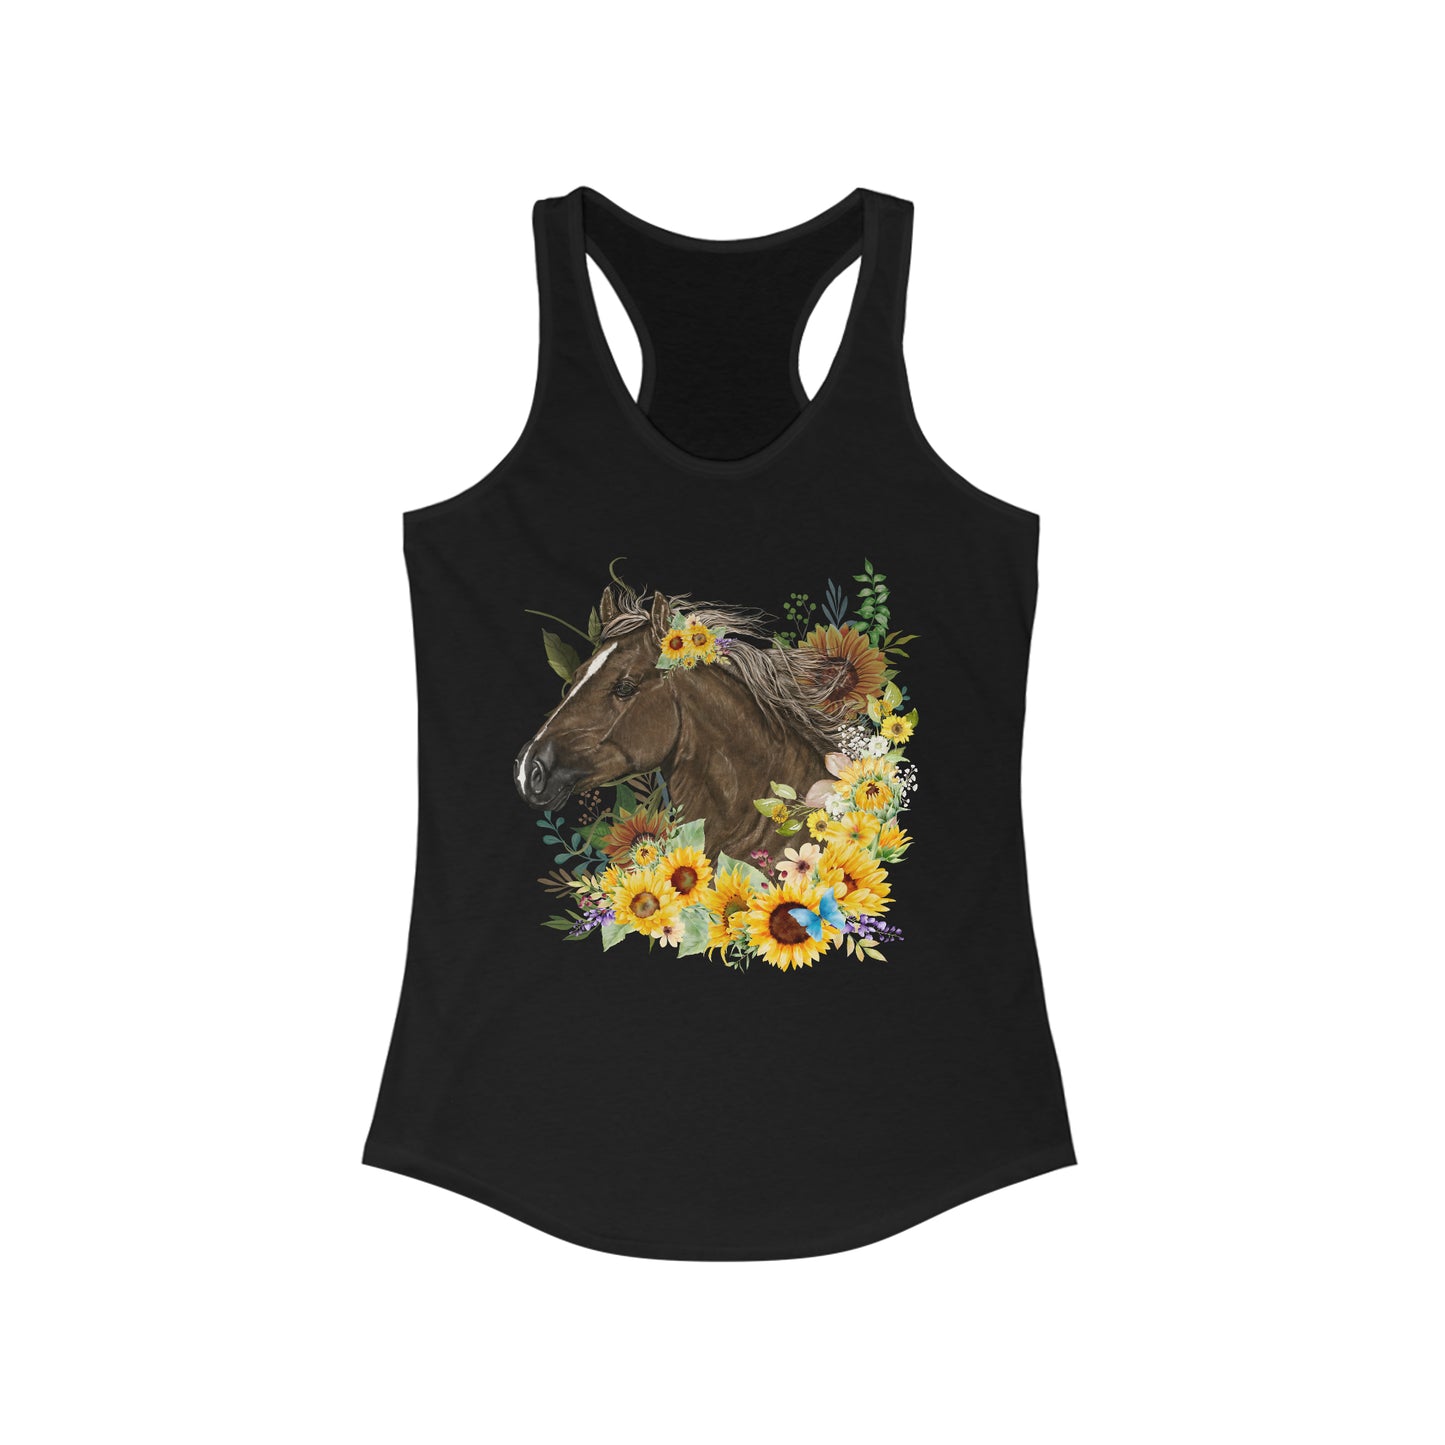 Horse and Sunflowers Tank Top with Vintage Flair | Ideal for Cowgirls and Country Girls